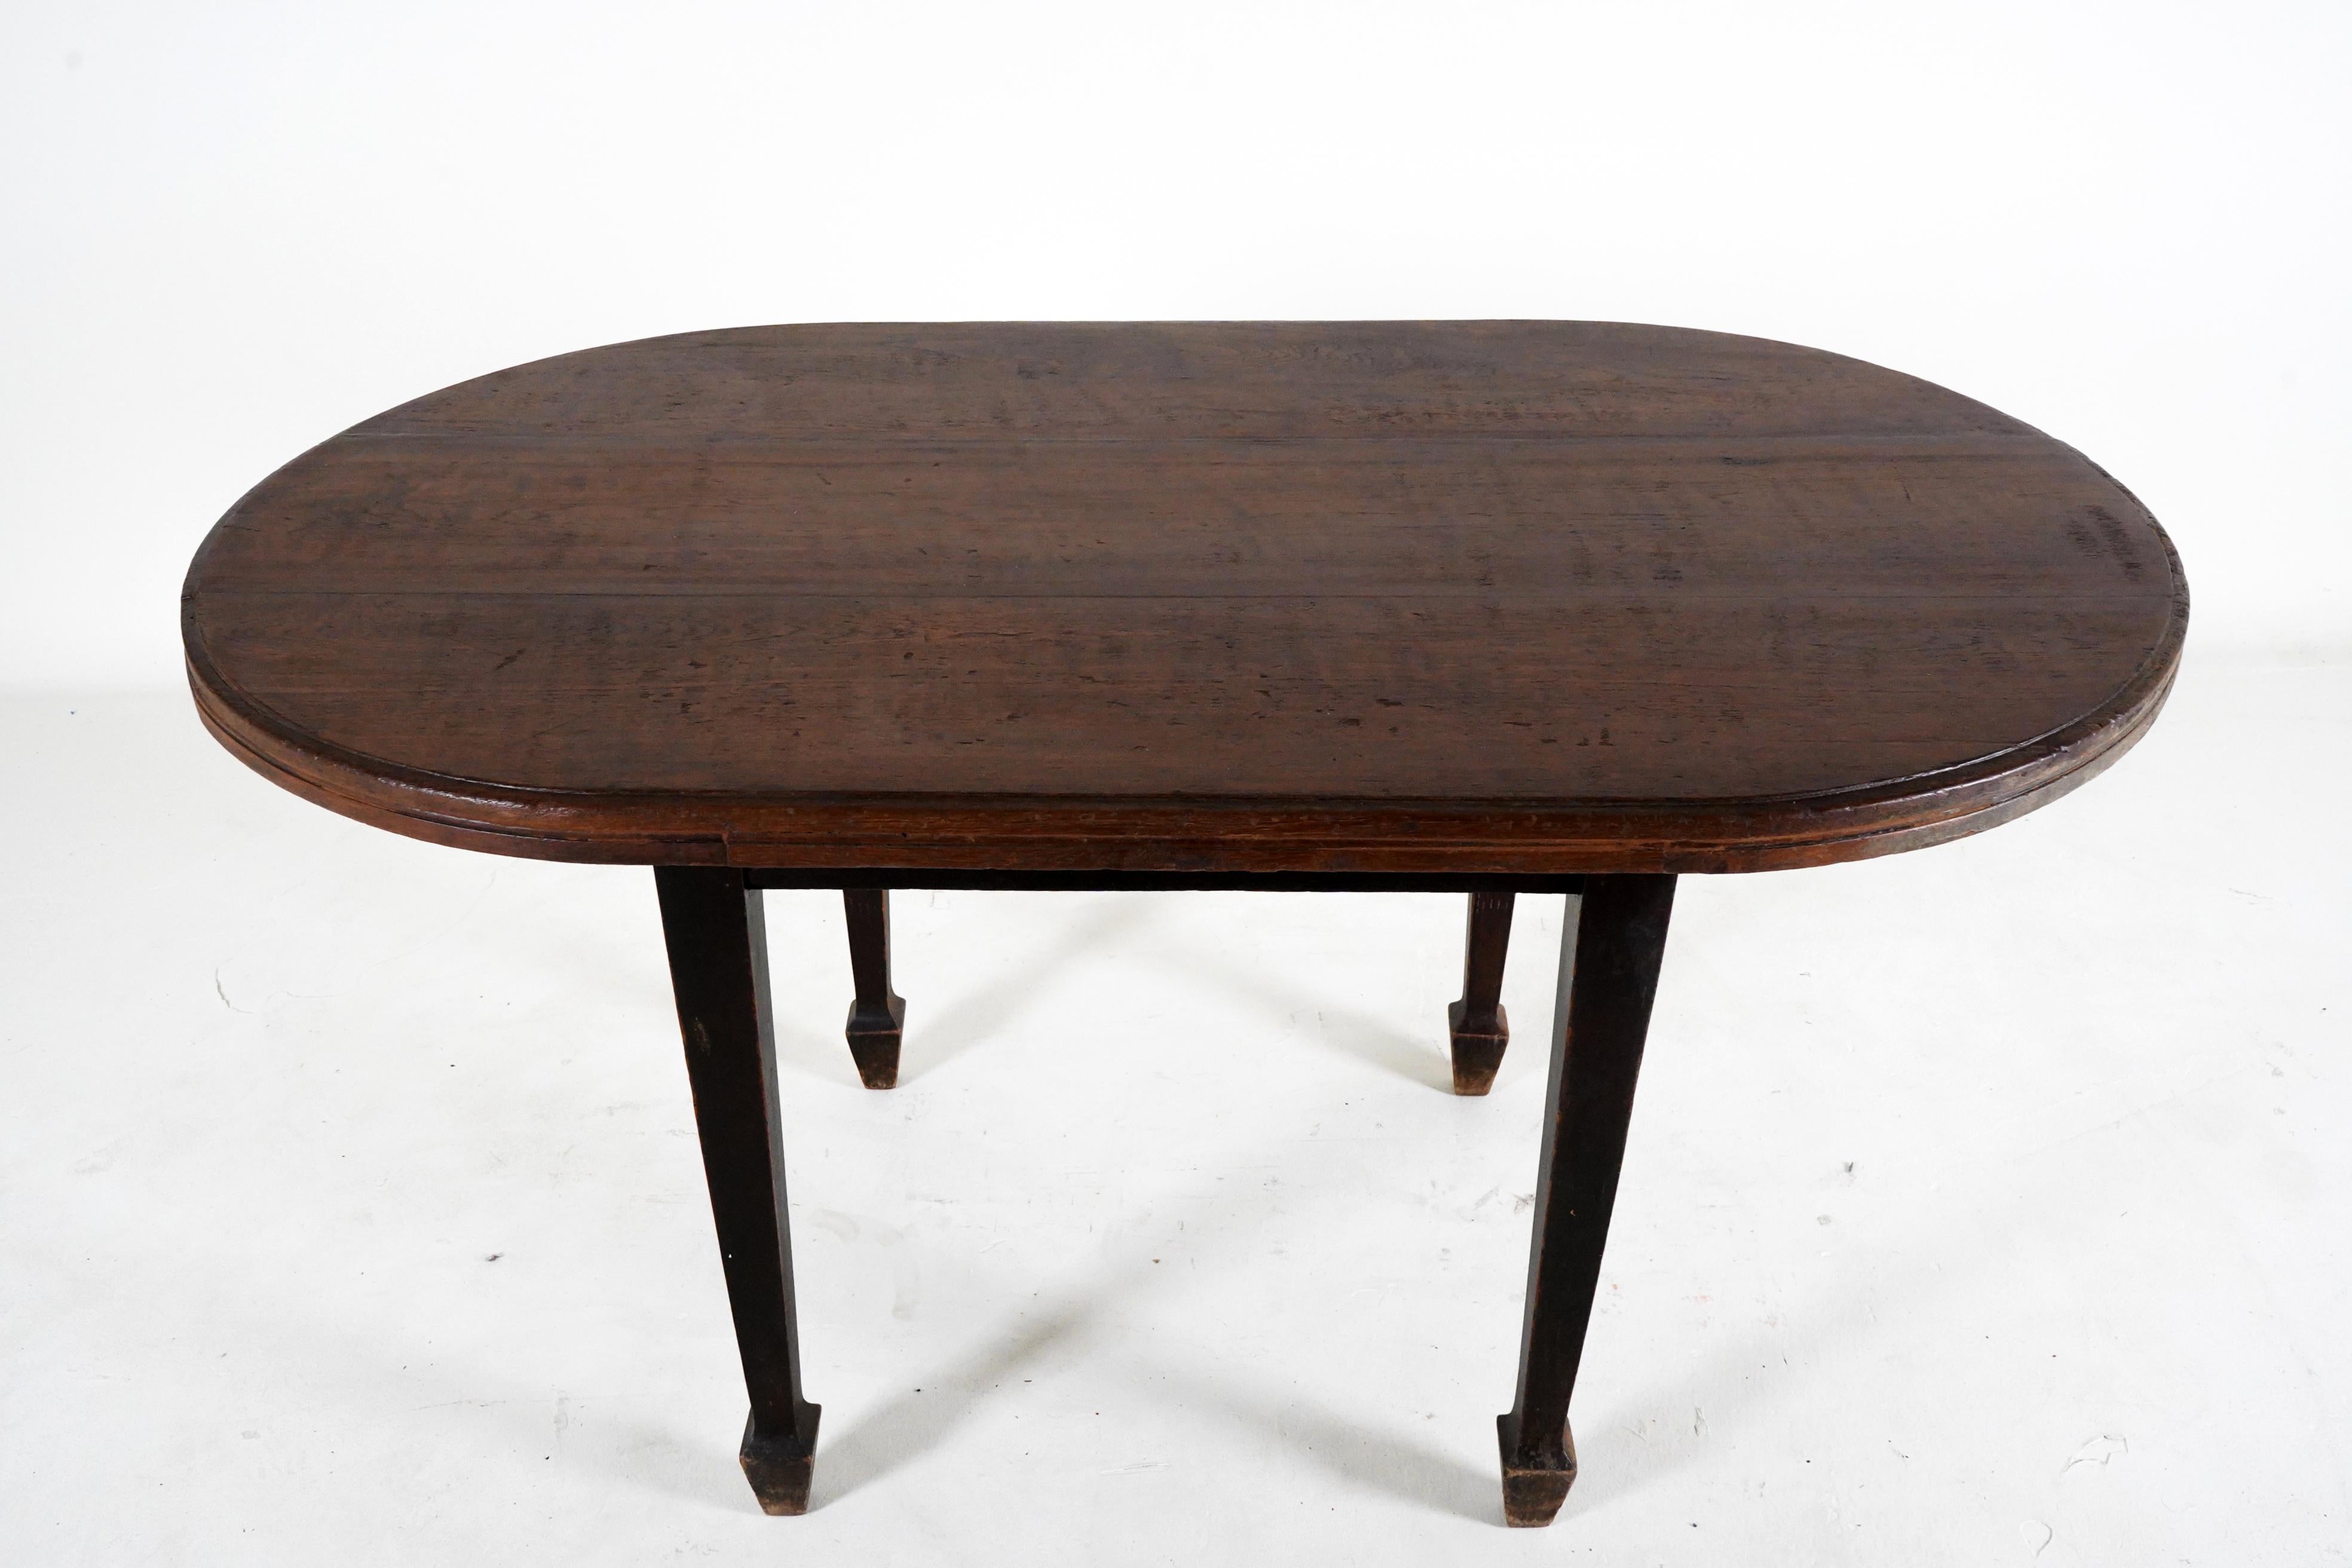 The natural roughness of the material is what gives this table its authenticity. It is a stunning piece rich in texture and history, and may serve a wide variety of roles in its future setting, such as a coffee table, a low bench or even as a bed.